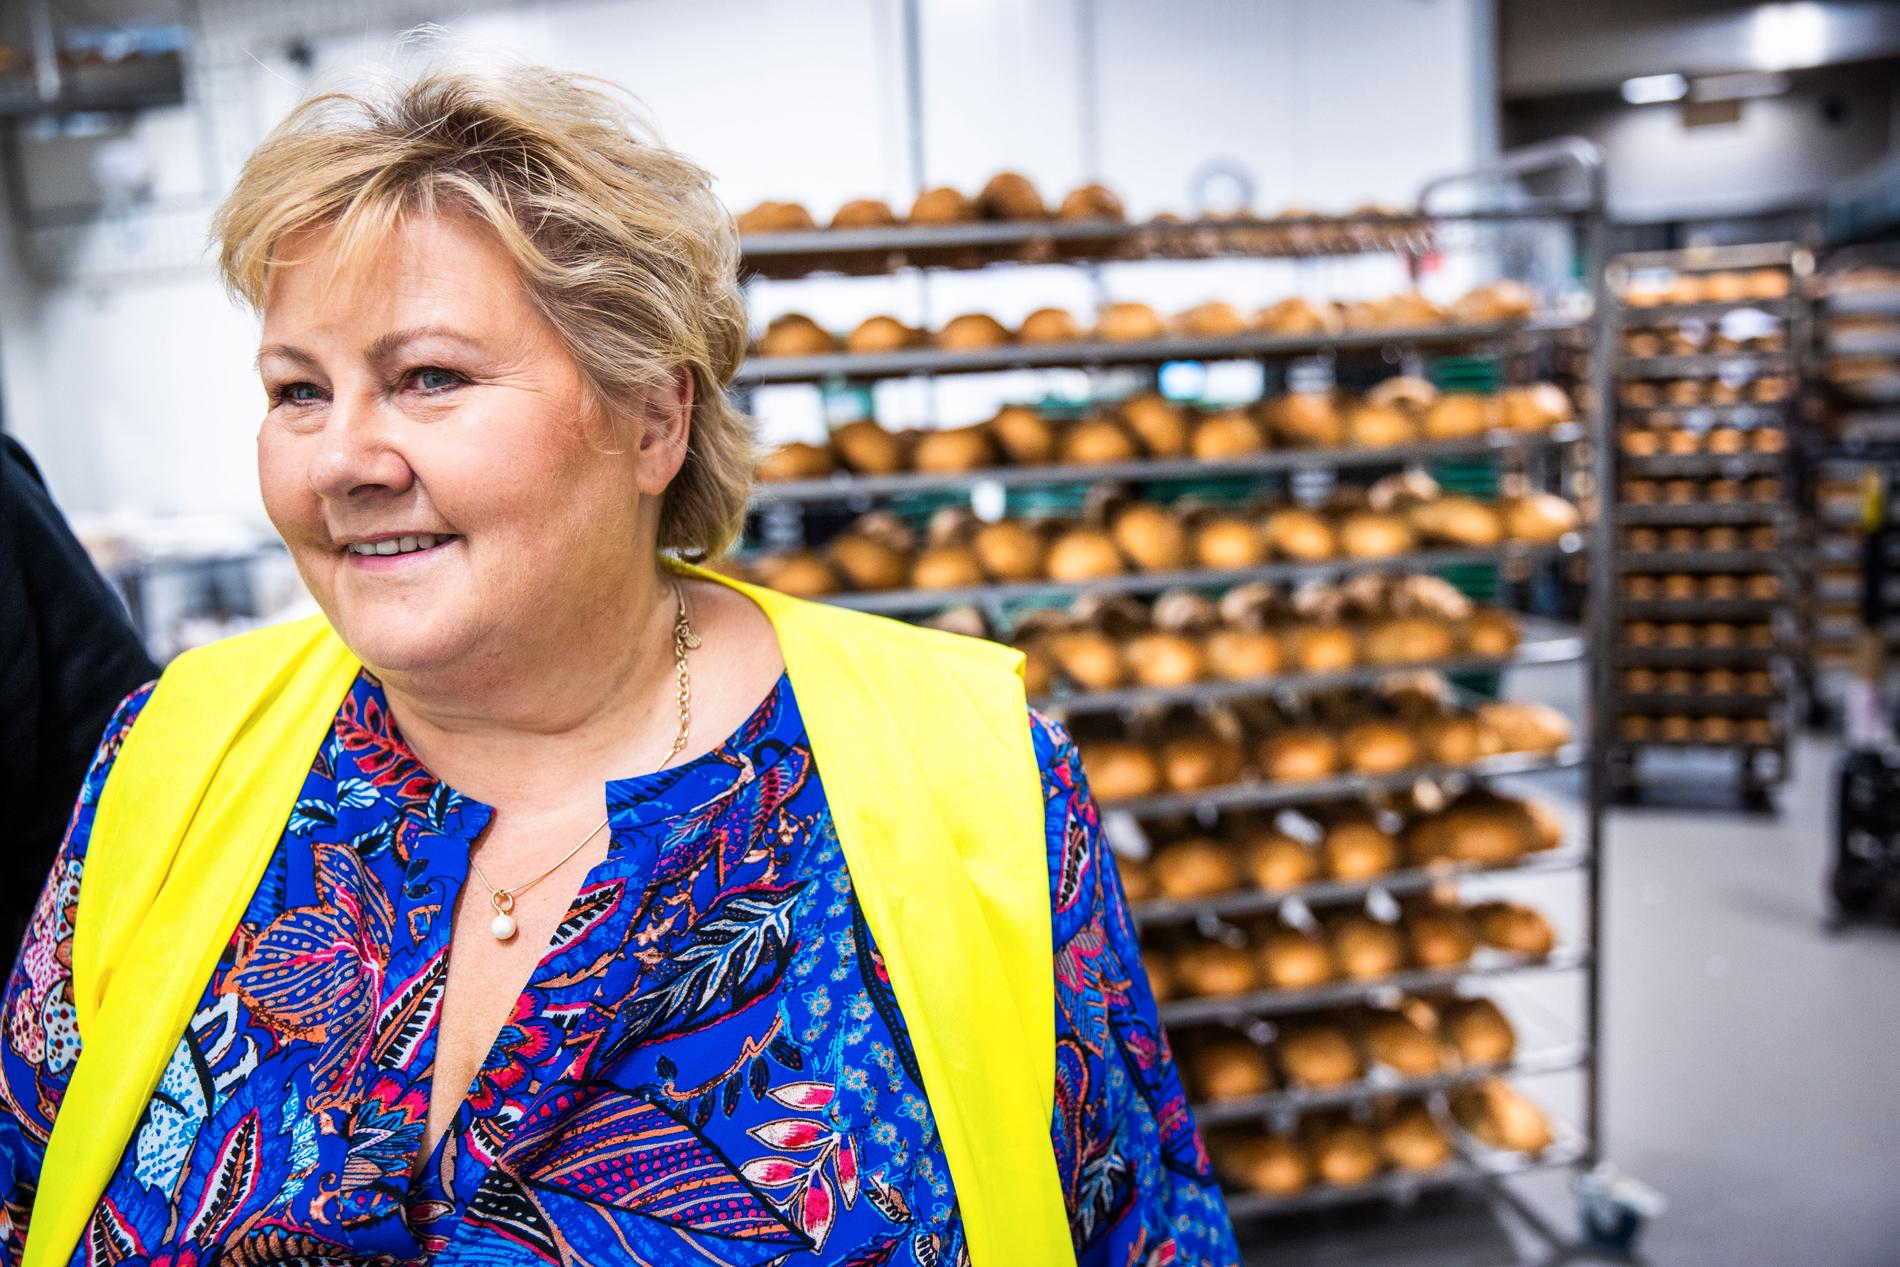 Erna Solberg proposes lowering customs protection to lower food prices, but faces opposition